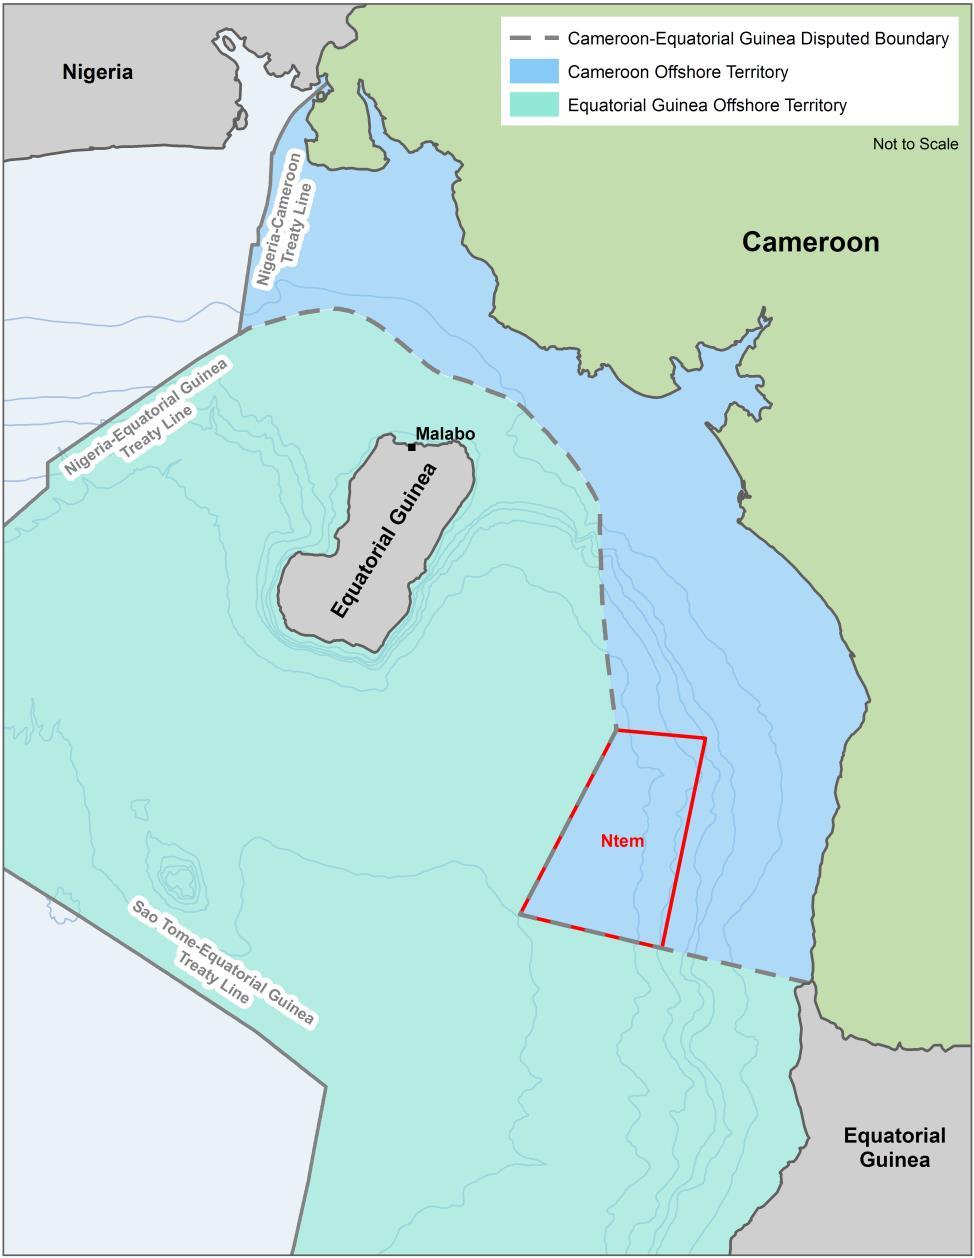 Cameroon & Equatorial Guinea Maritime Border Maritime Border Claim Equatorial Guinea made claims over Cameroon s maritime territory; The western and southern boundaries of the Ntem concession